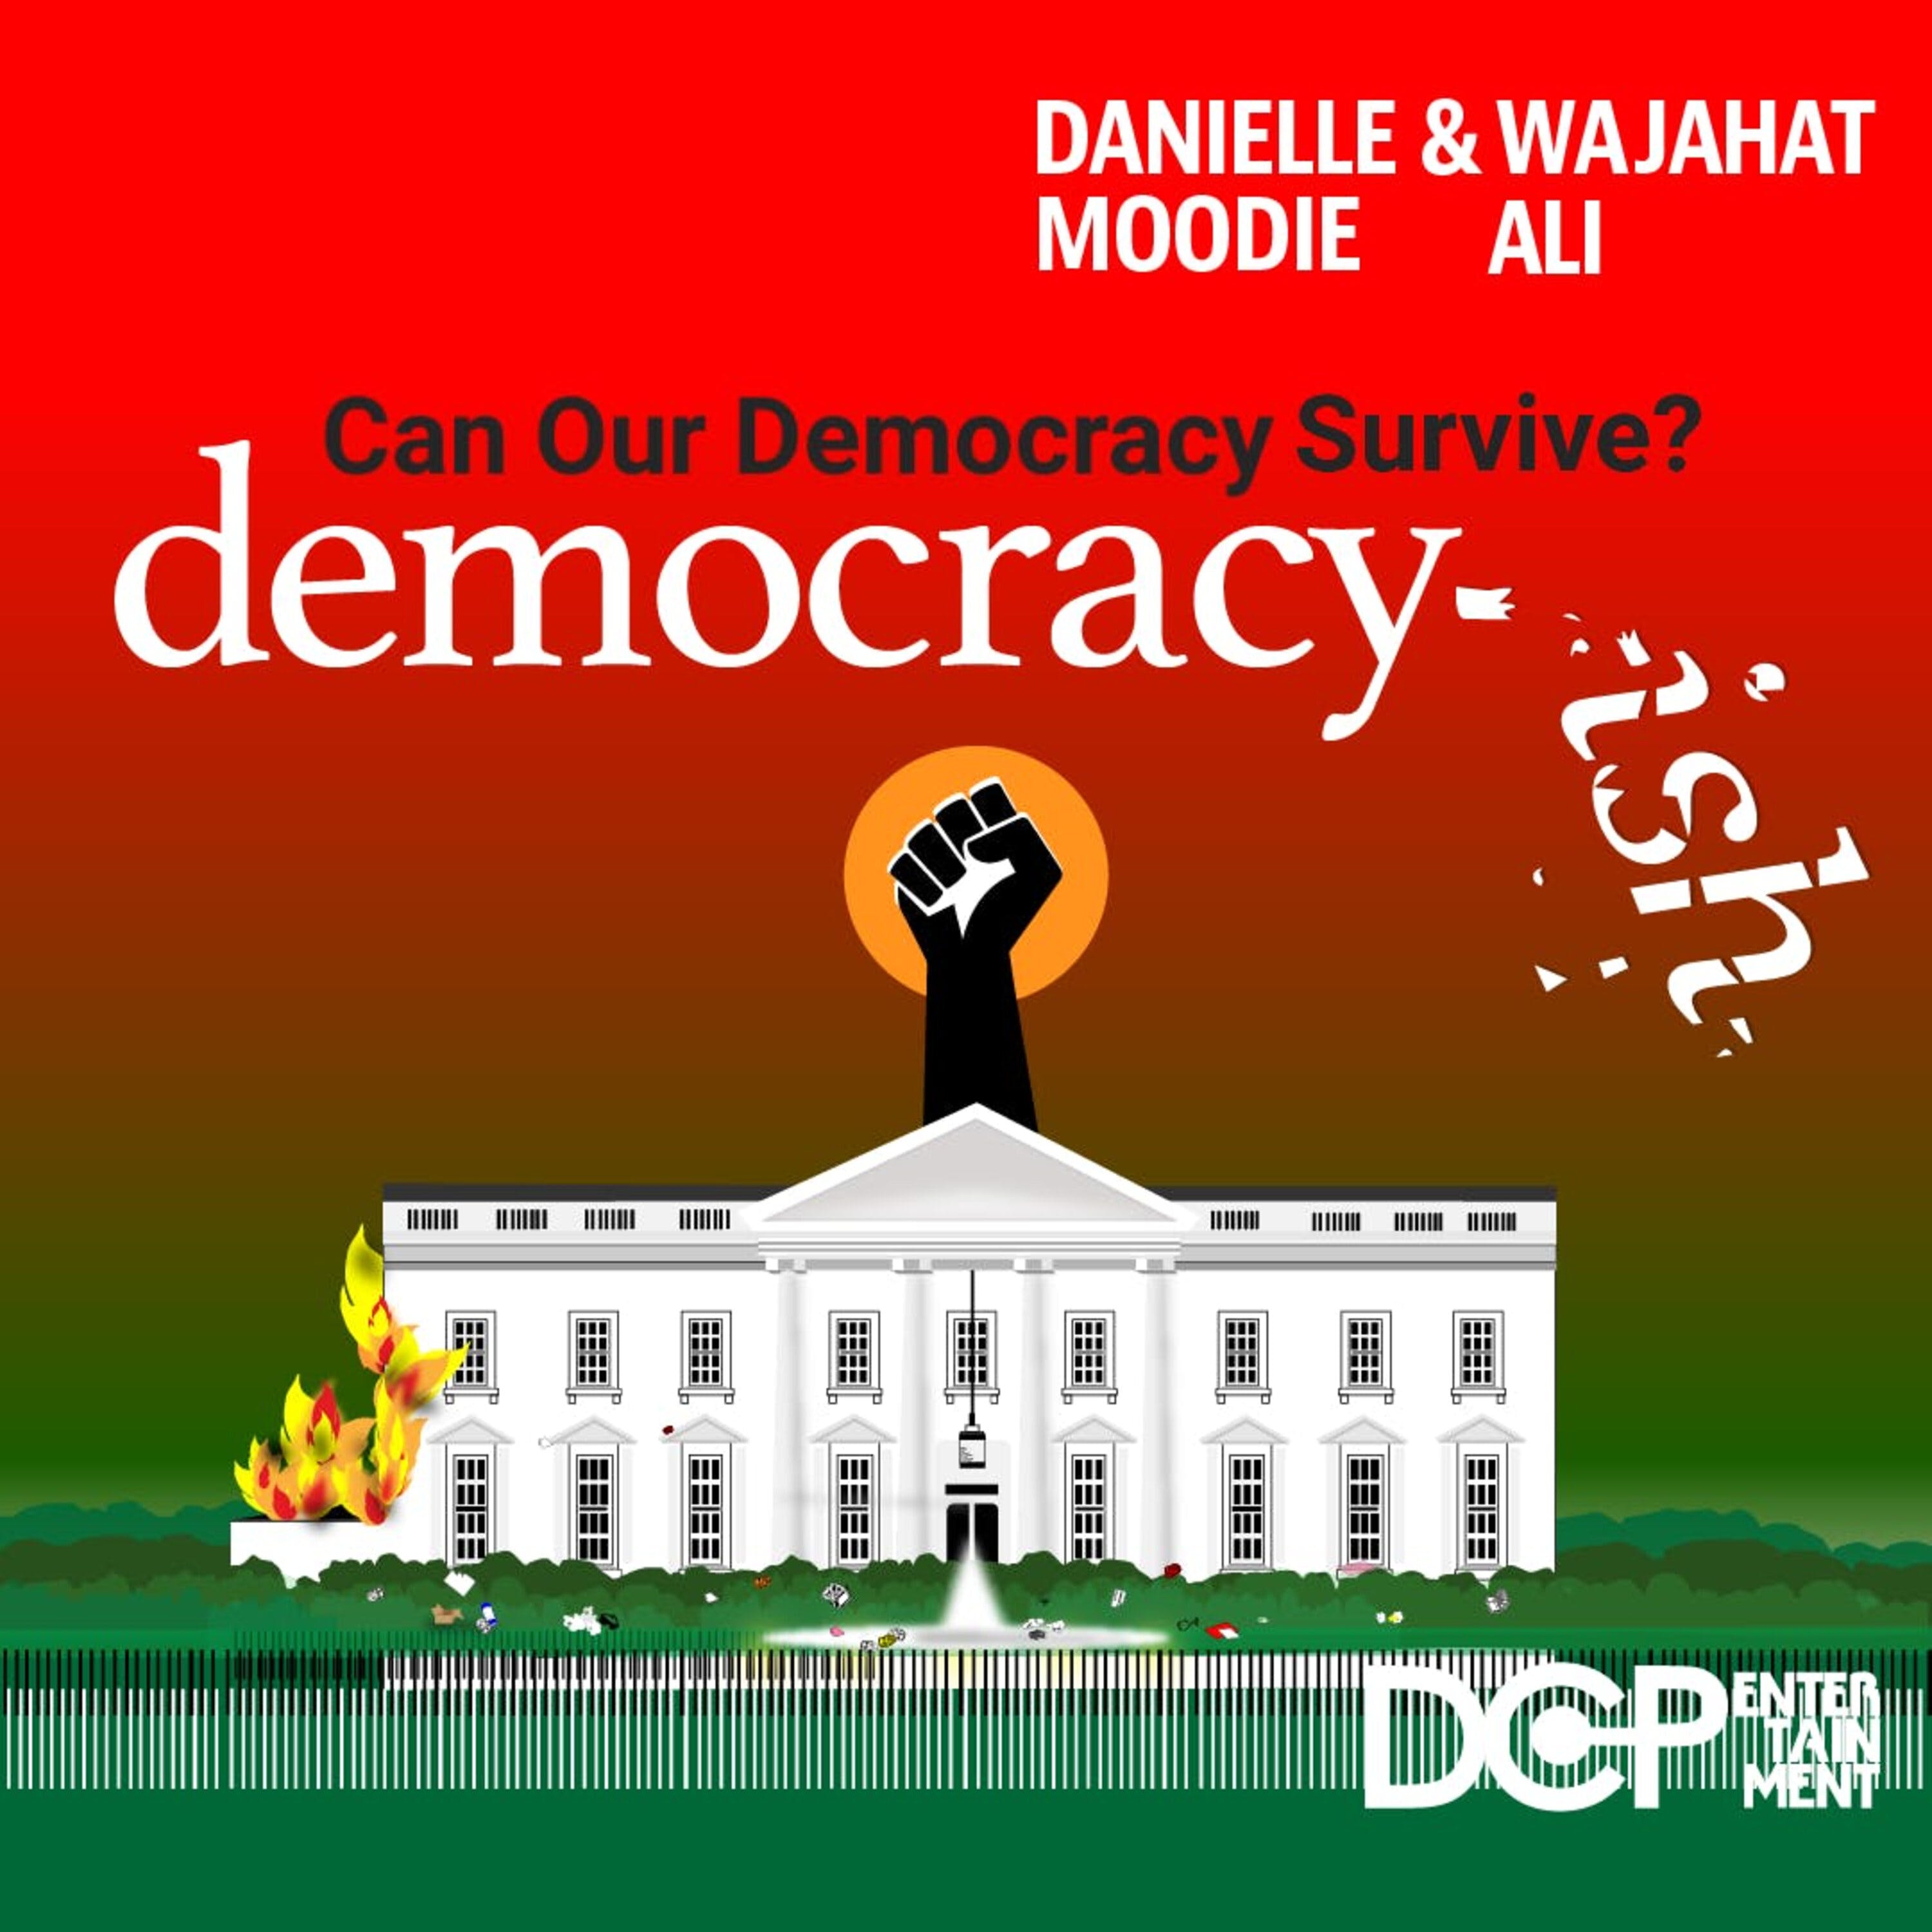 Can Our Democracy Survive?